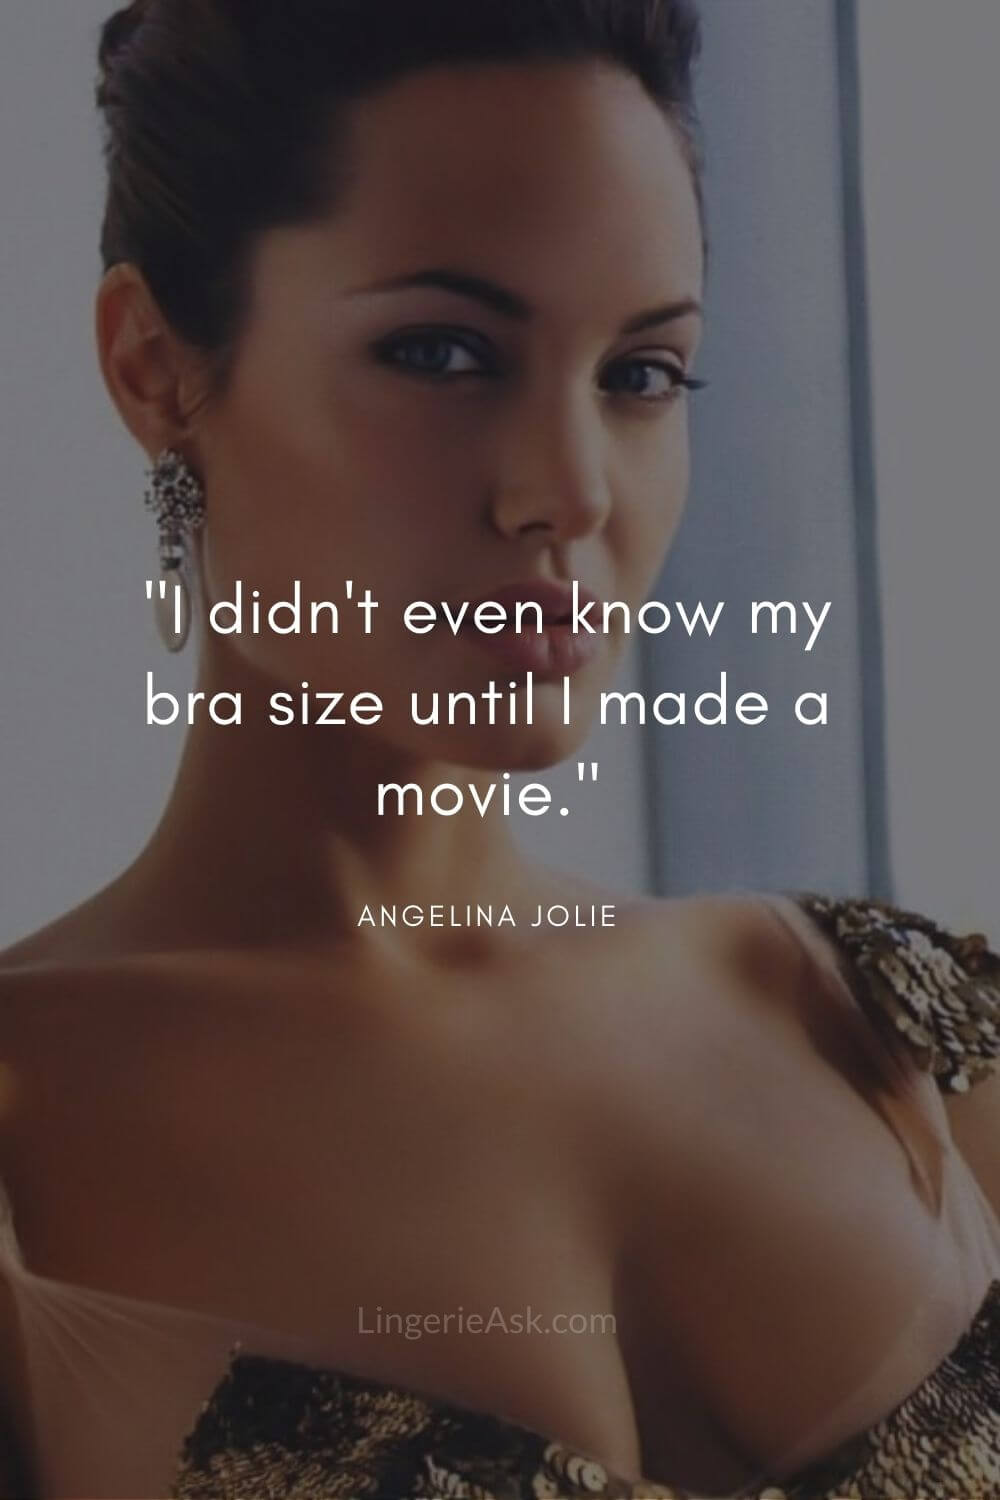 I didn't even know my bra size until I made a movie.